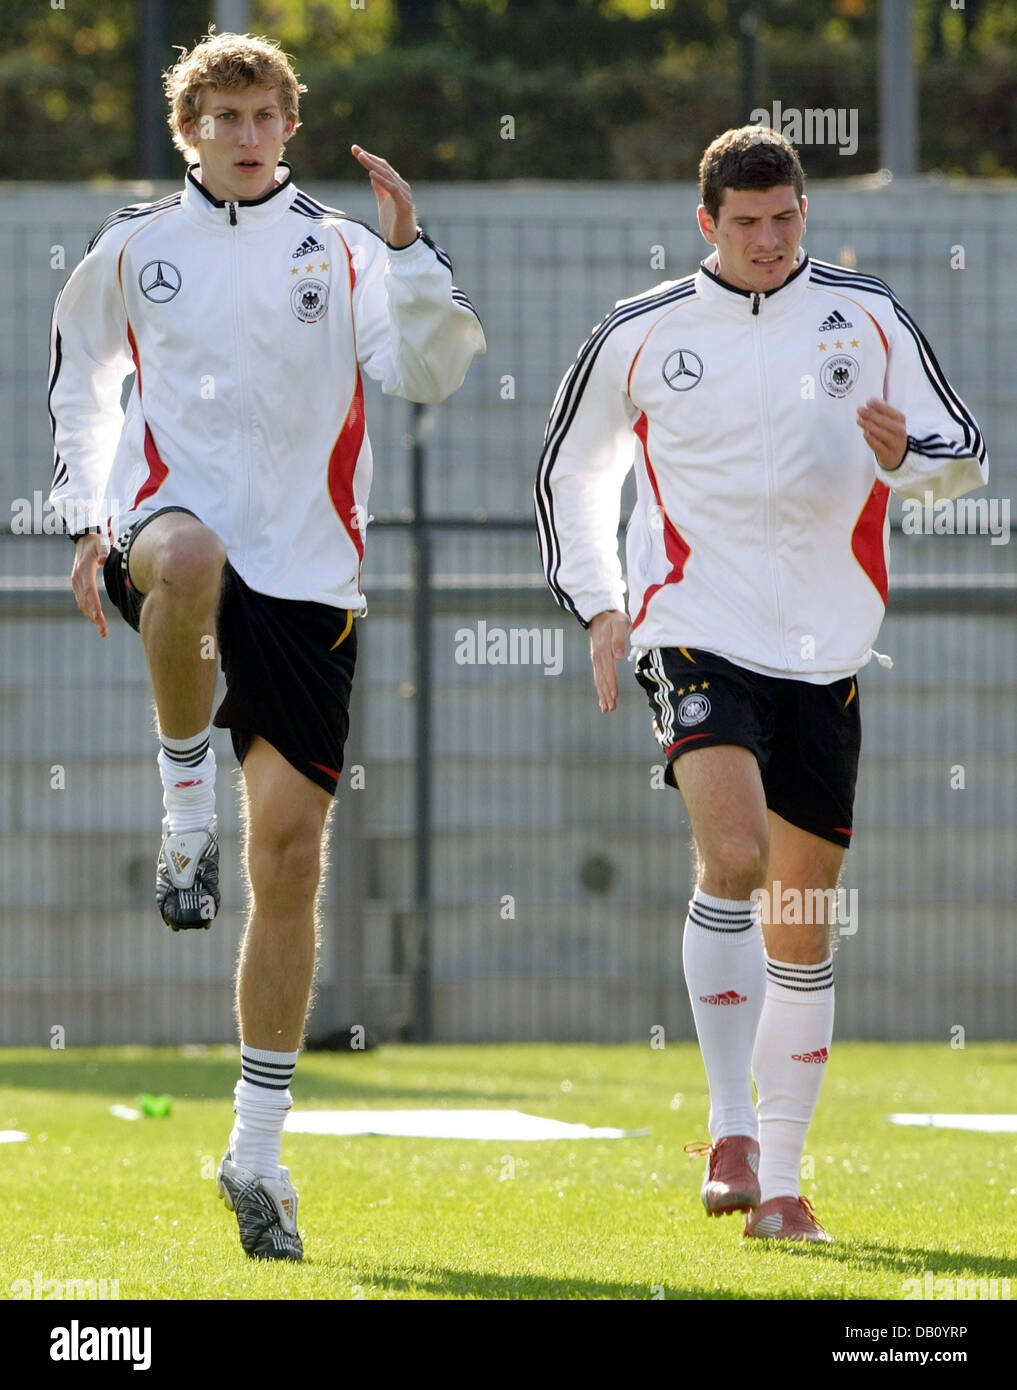 German national soccer player Stefan Kiessling (L) and Mario Gomez team warm-up during the training the German team in Berlin, Germany, 10 October 2007. The German team faces Ireland in Dublin on 13 October 2007 in a qualifier for the European Football Championship 2008. Photo: Soeren Stache Stock Photo